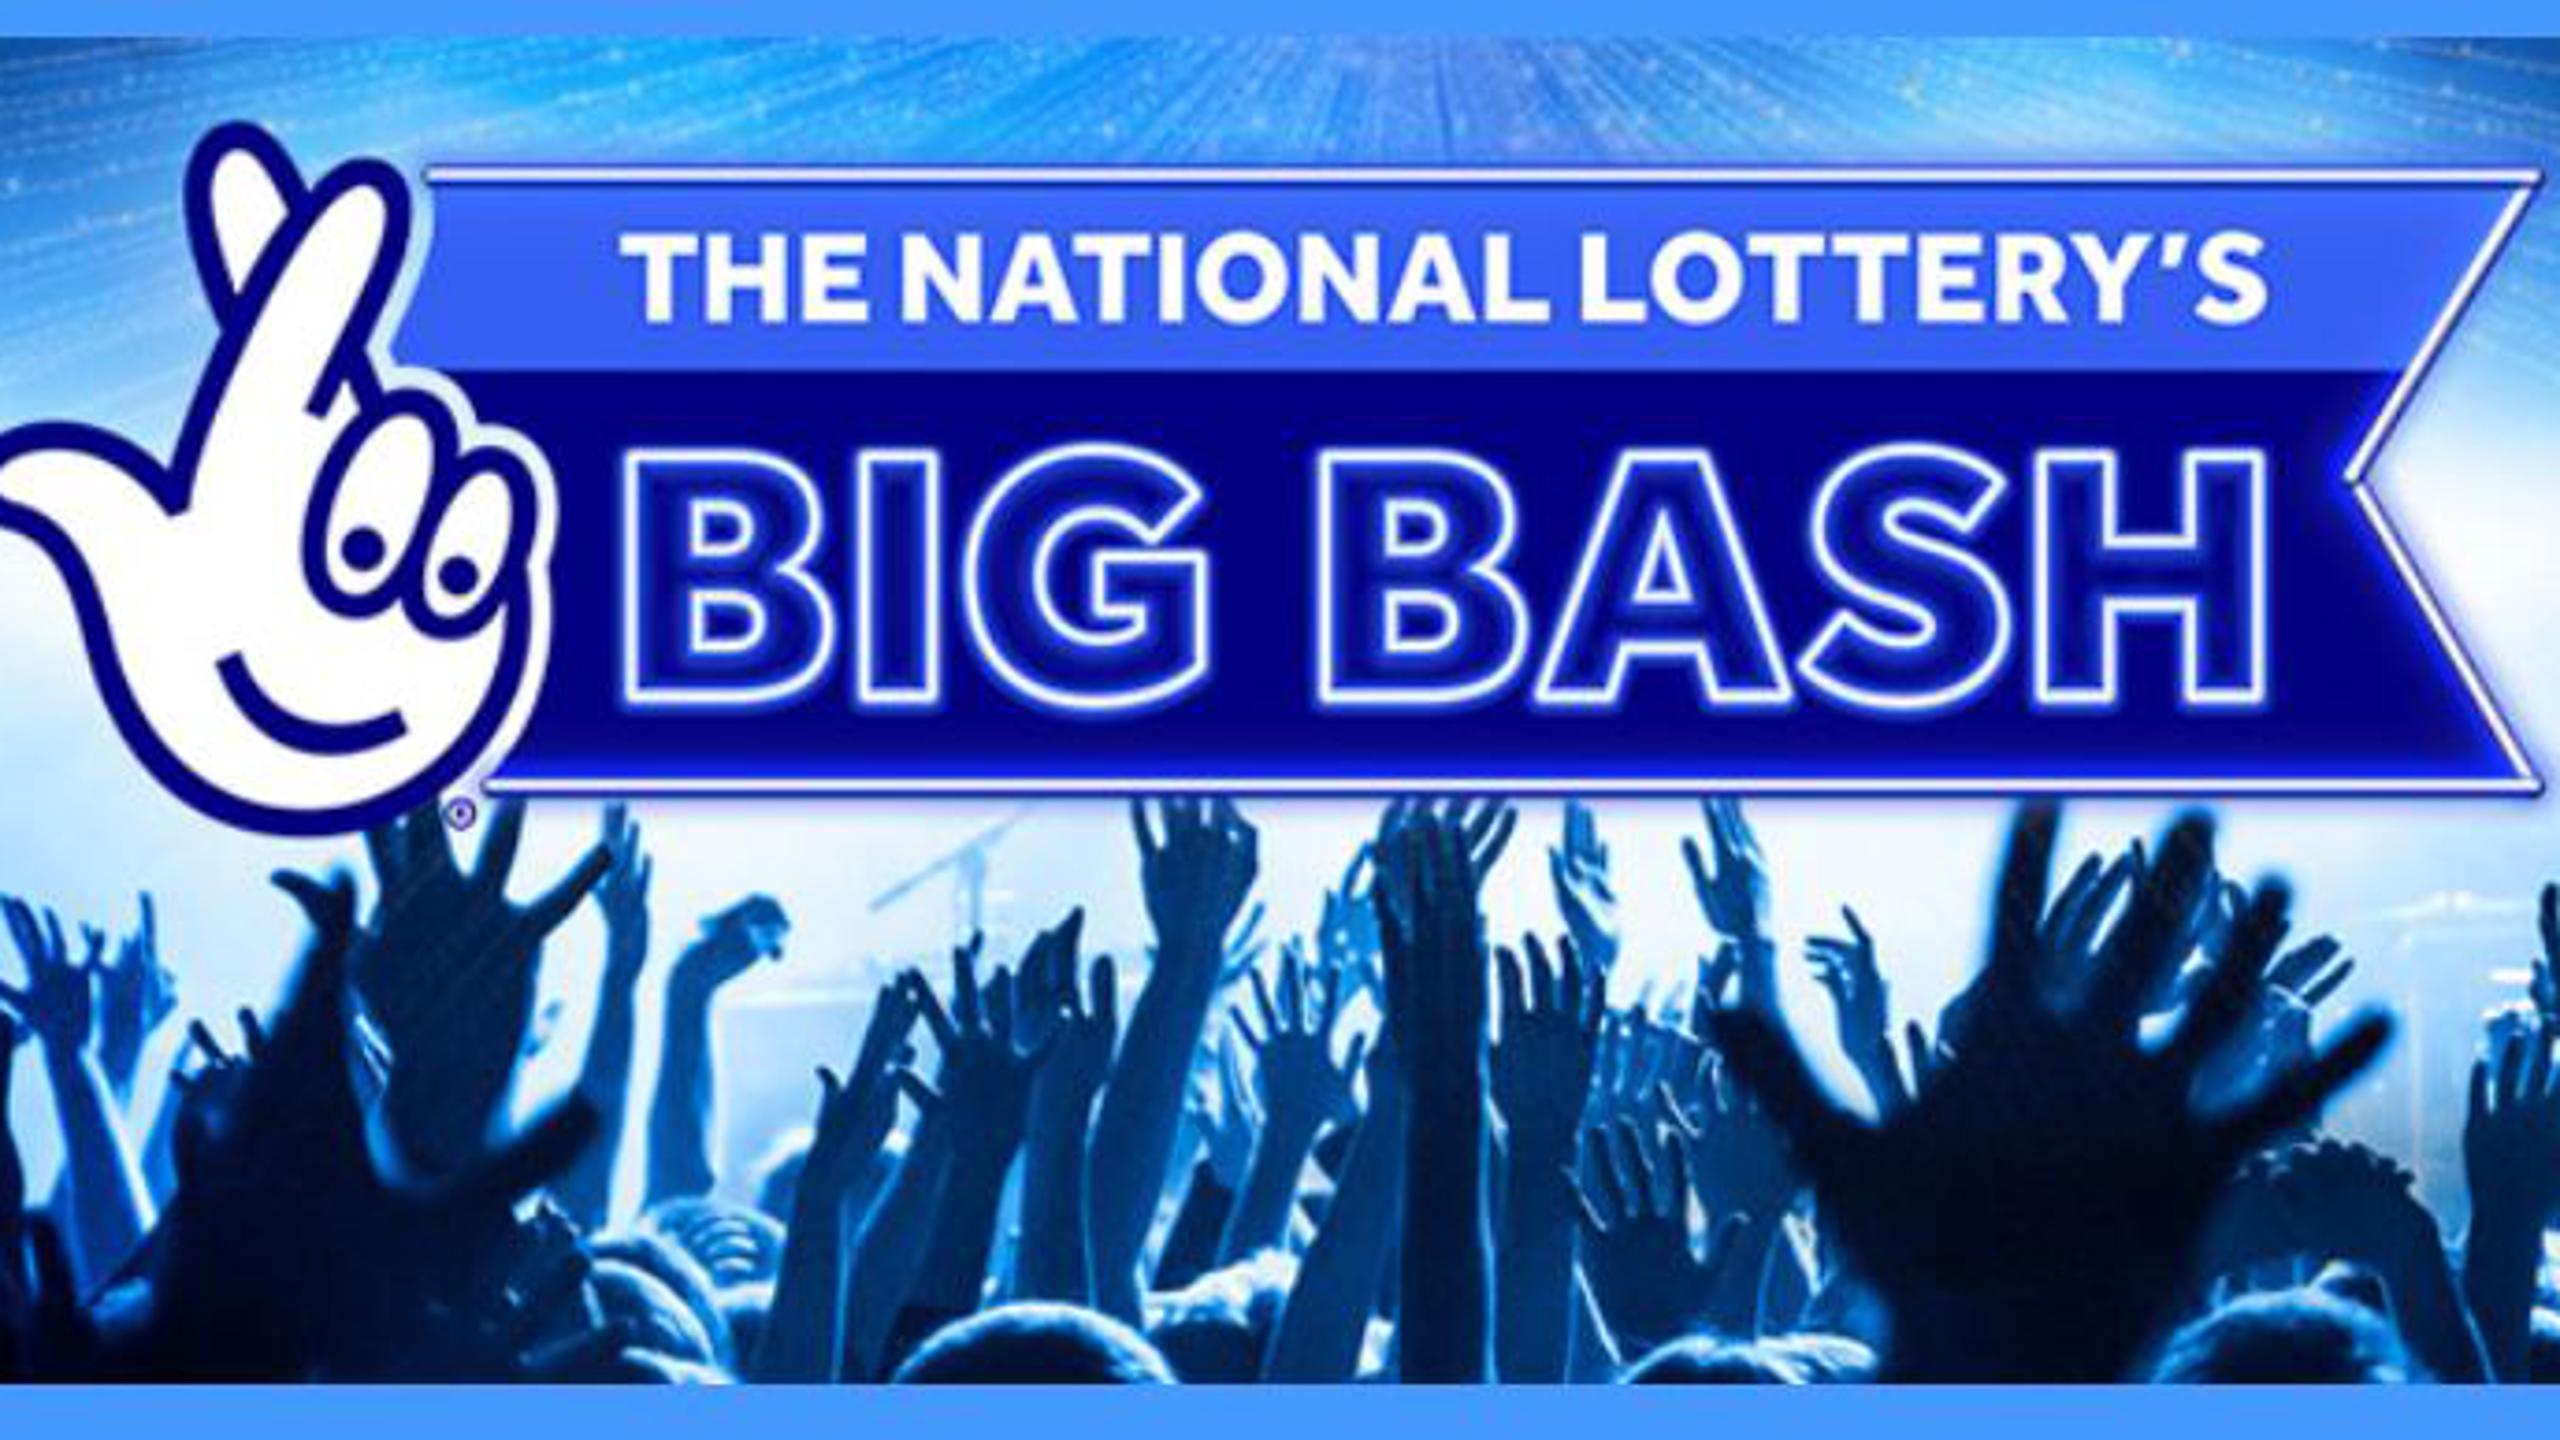 The National Lottery's Big Bash. Tickets, lineup, bands for The